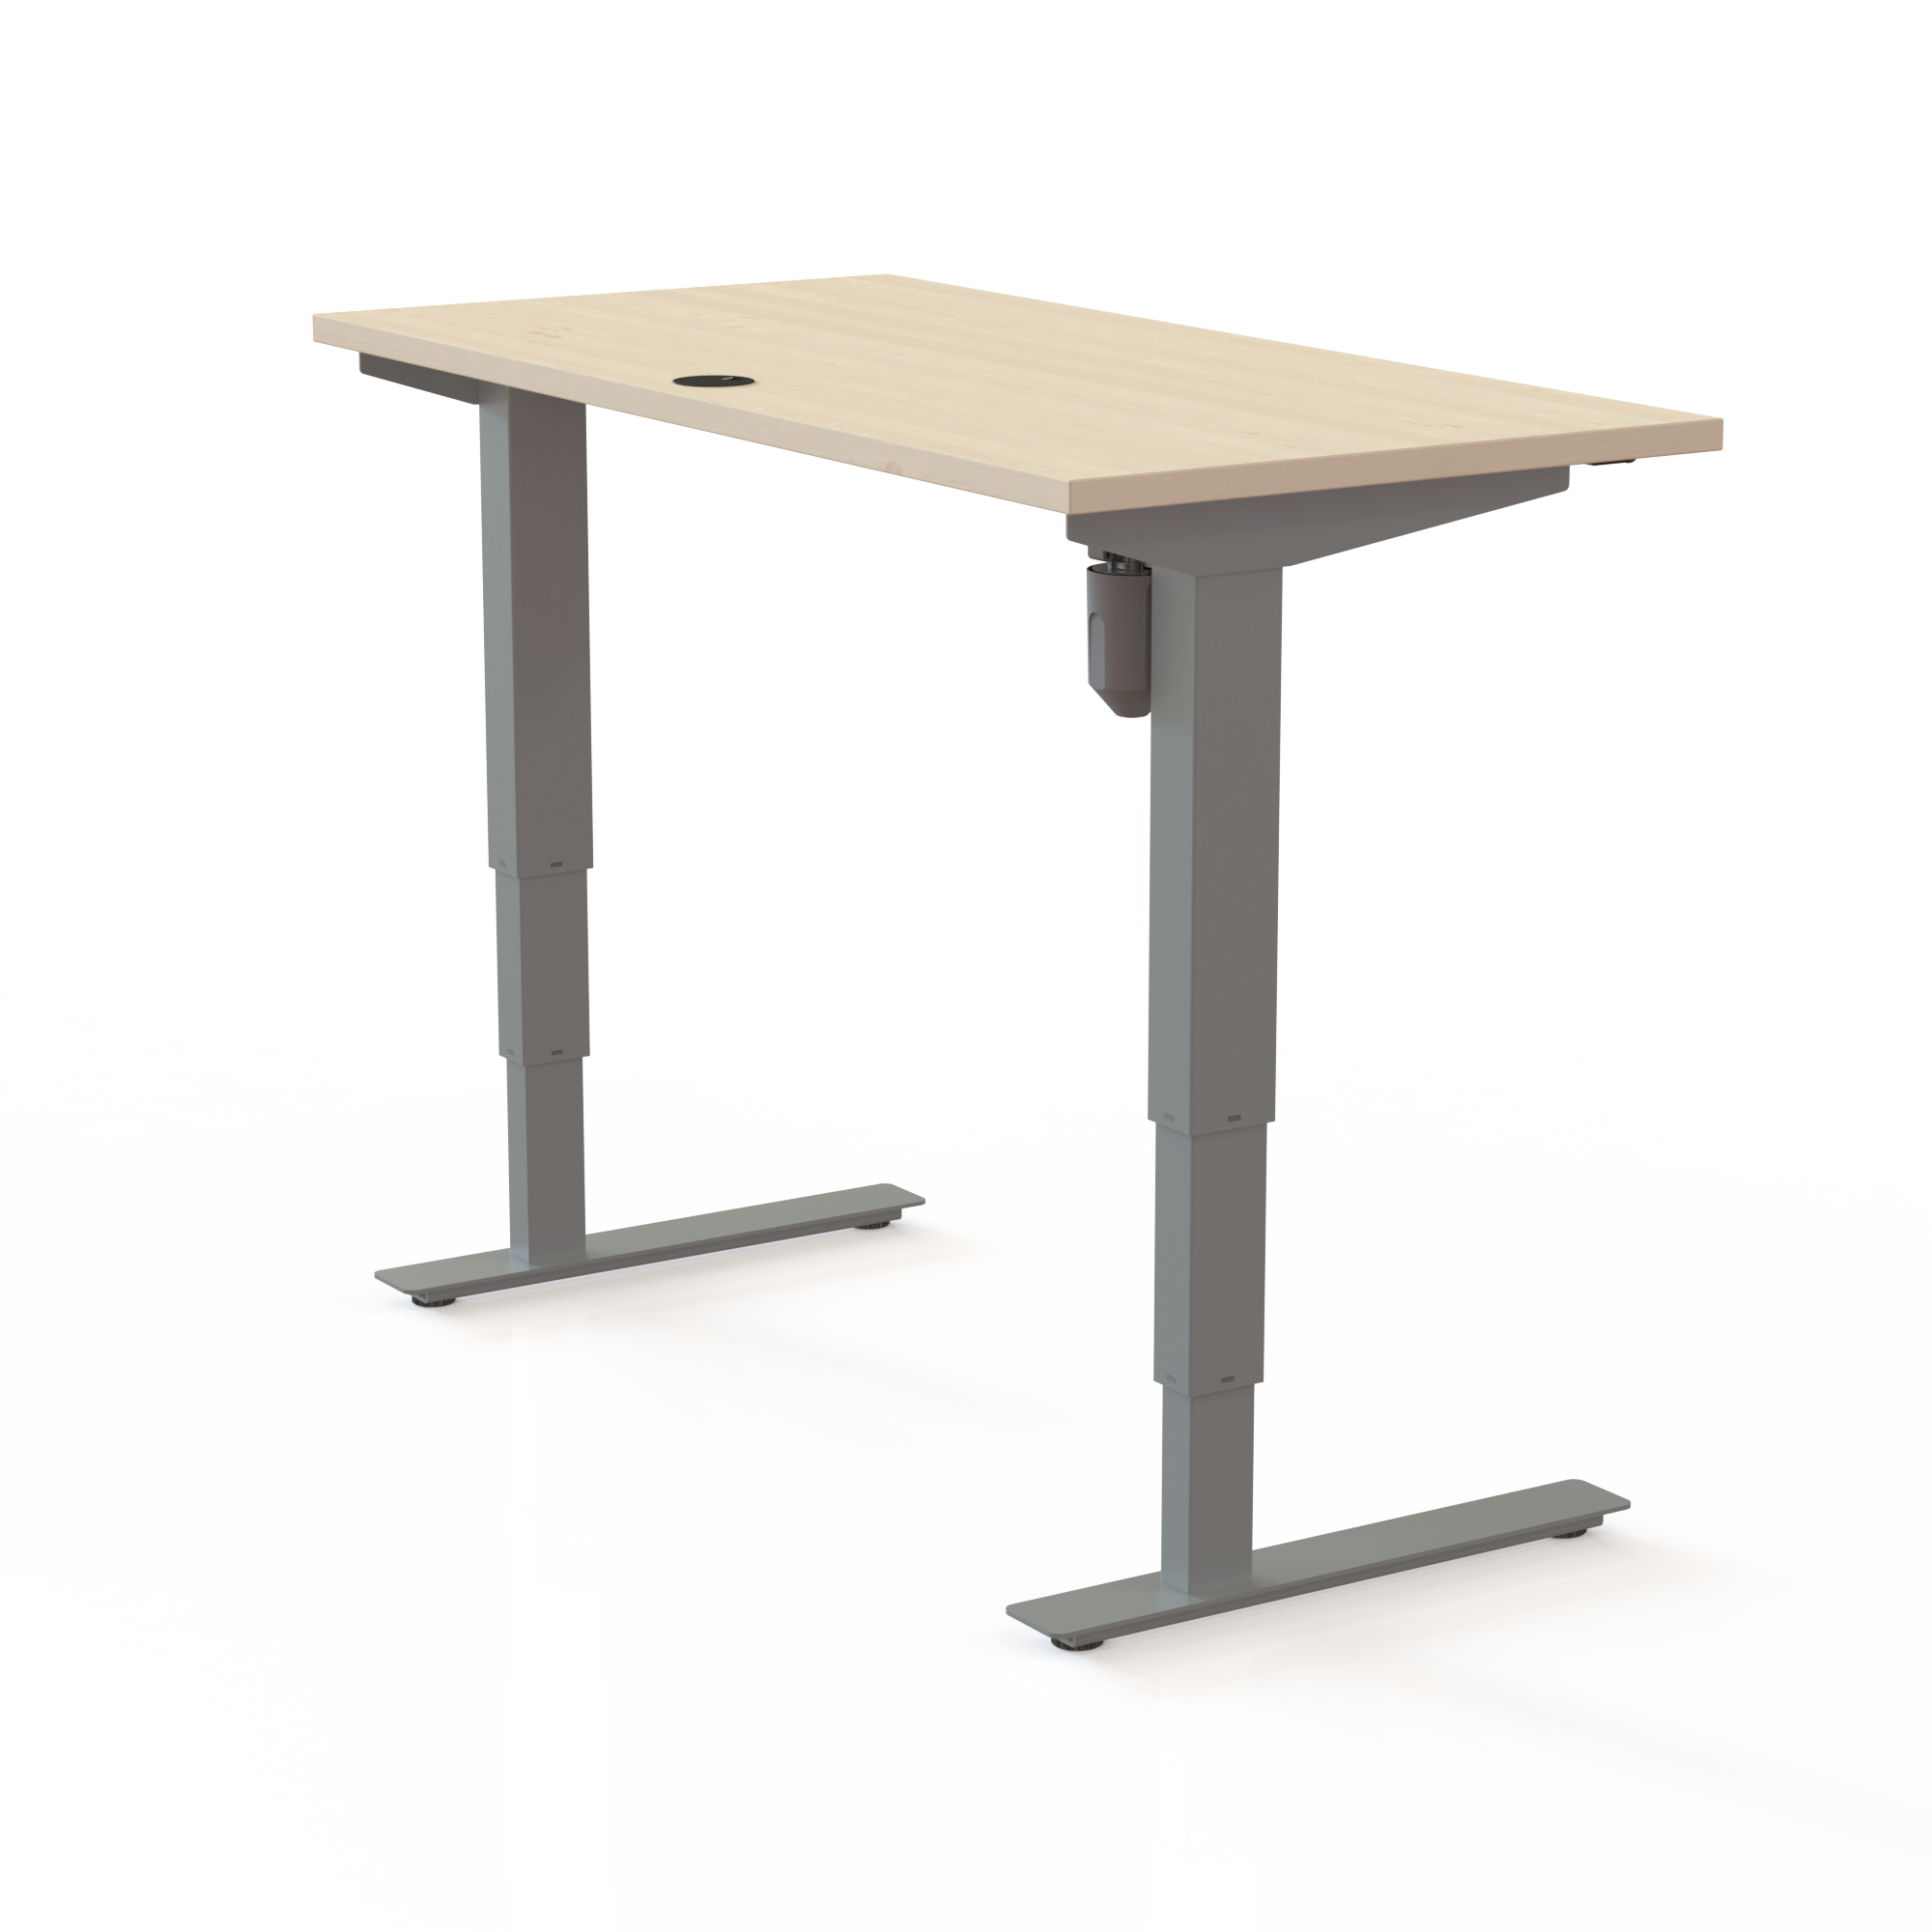 Electric Adjustable Desk | 120x60 cm | Maple with silver frame